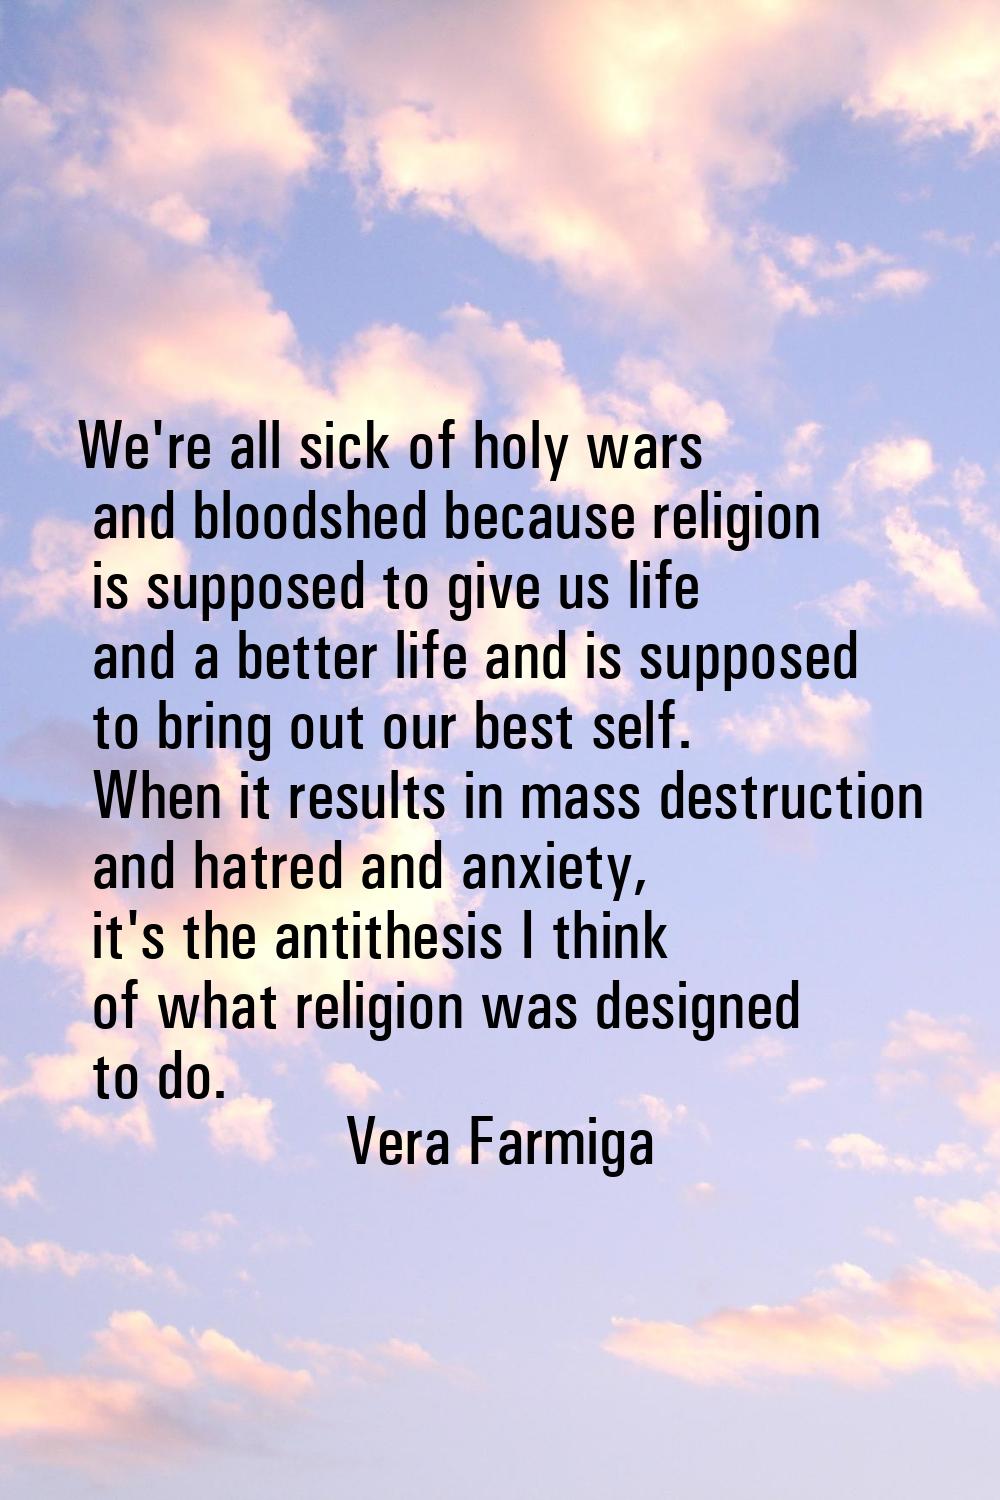 We're all sick of holy wars and bloodshed because religion is supposed to give us life and a better